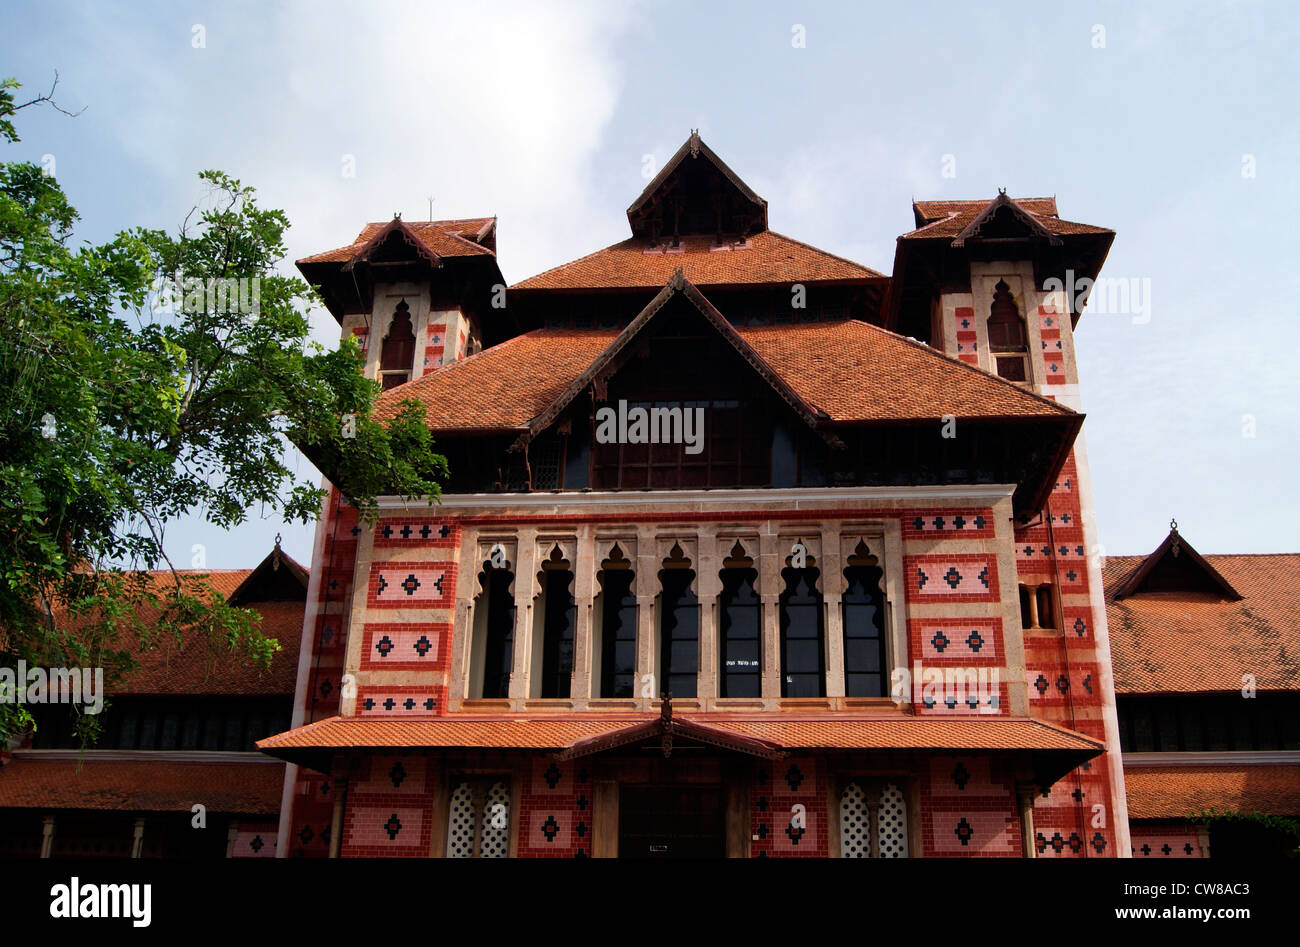 Napier Museum Palace in Trivandrum city of Kerala Built in 1880 Historical and Architecture Royal masterpiece of Ancient India Stock Photo